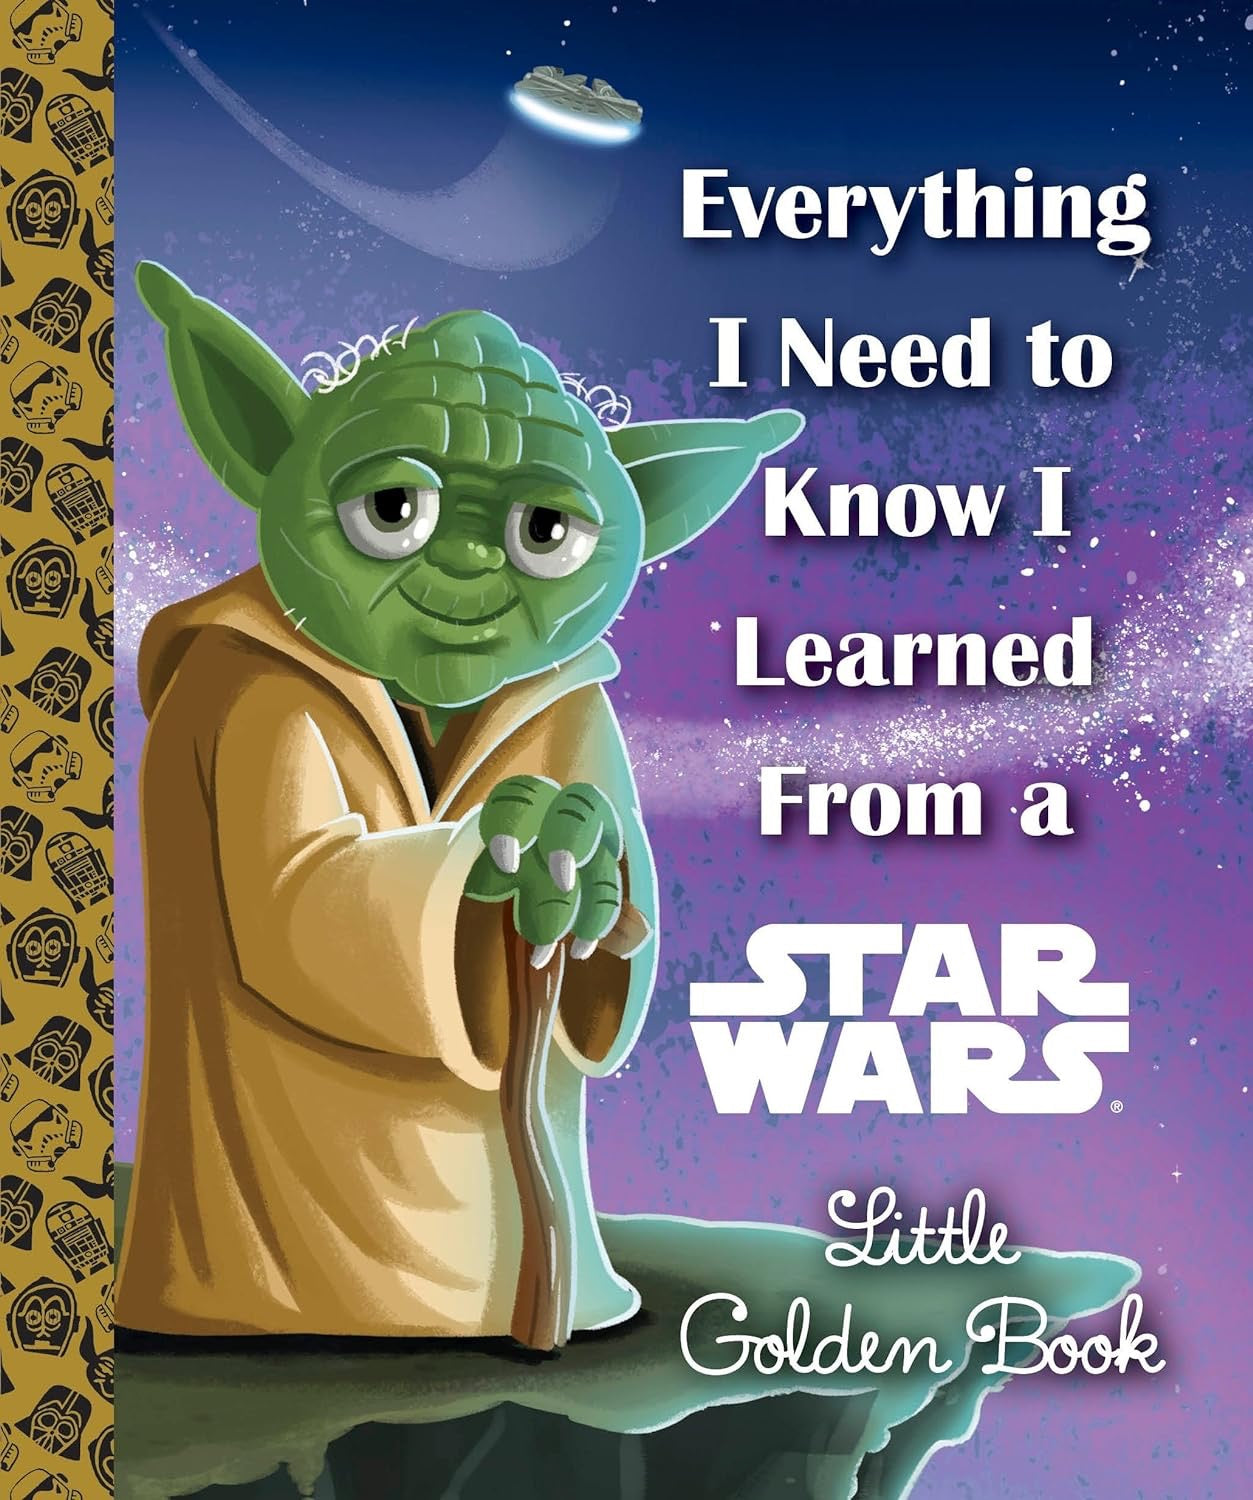 "Star Wars: Everything I Need To Know" Little Golden Book